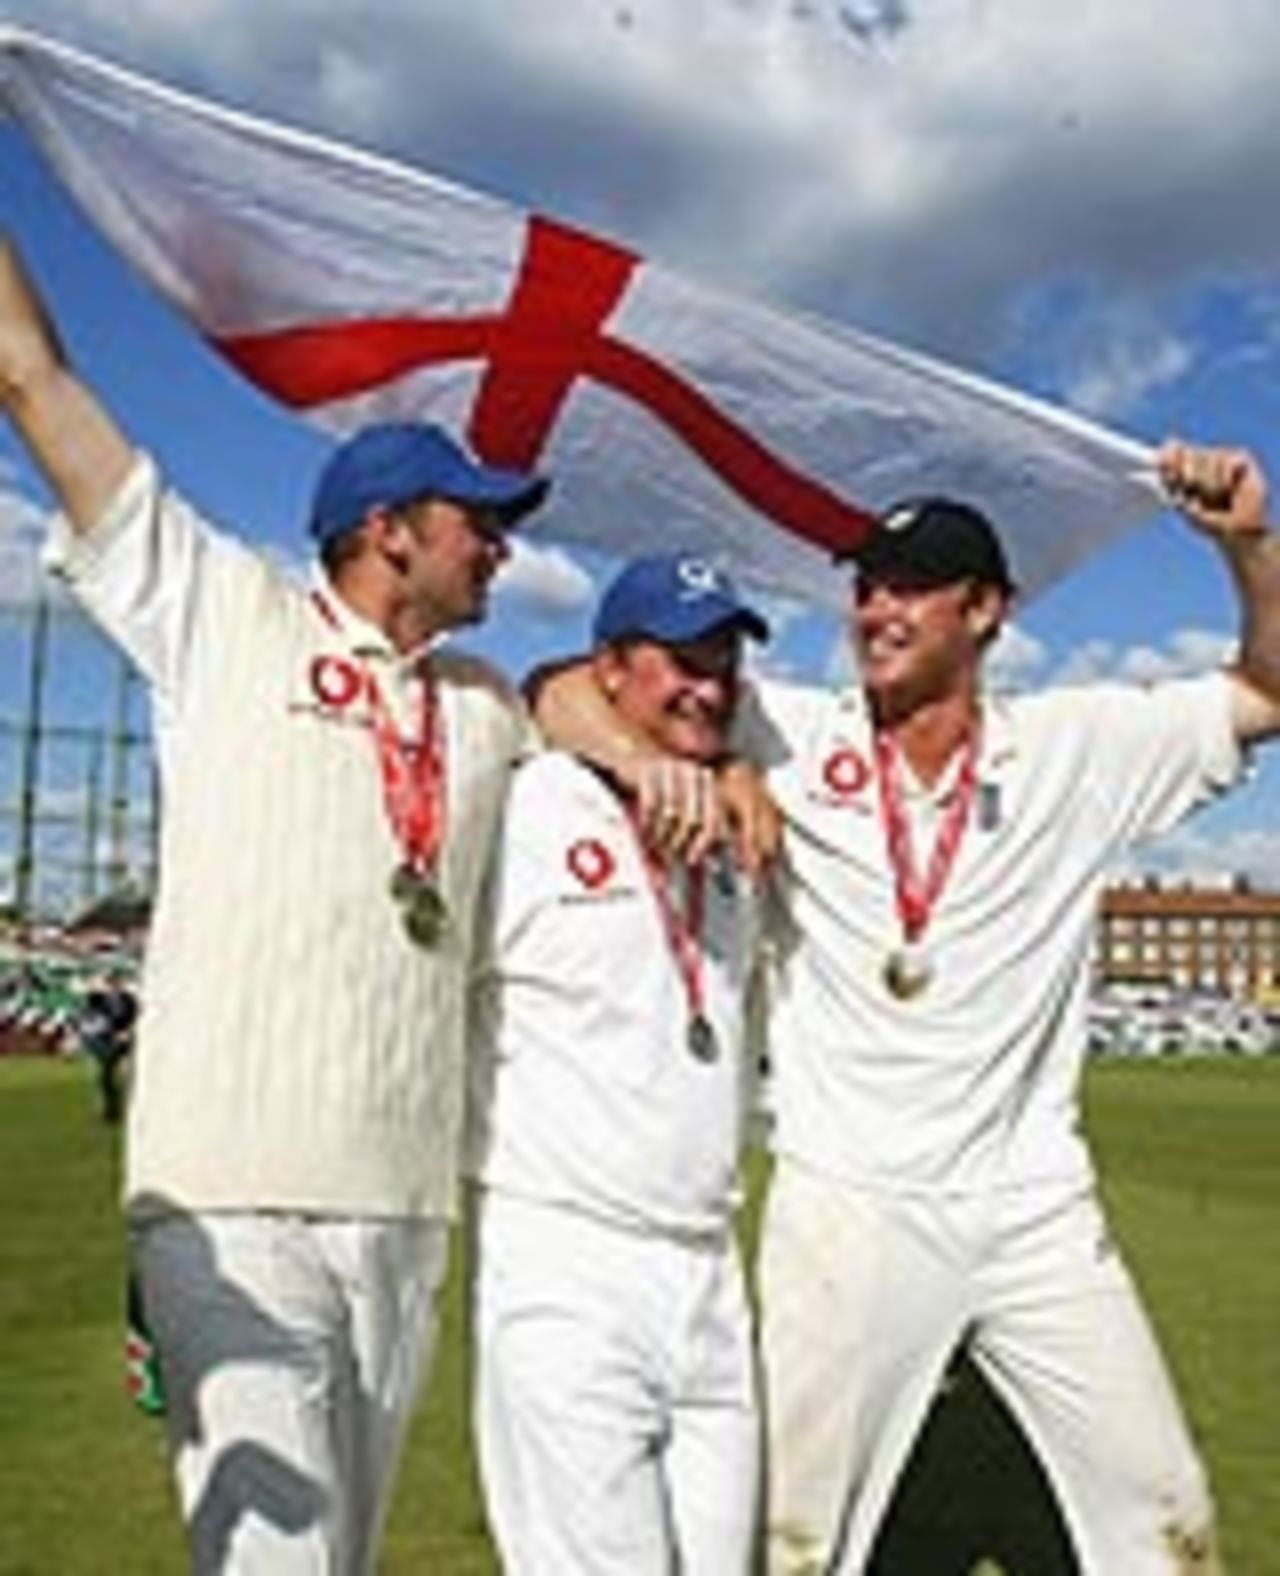 Steve Harmison, Robert Key and Andrew Flintoff take a lap of honour, as England complete the whitewash on the third day at The Oval